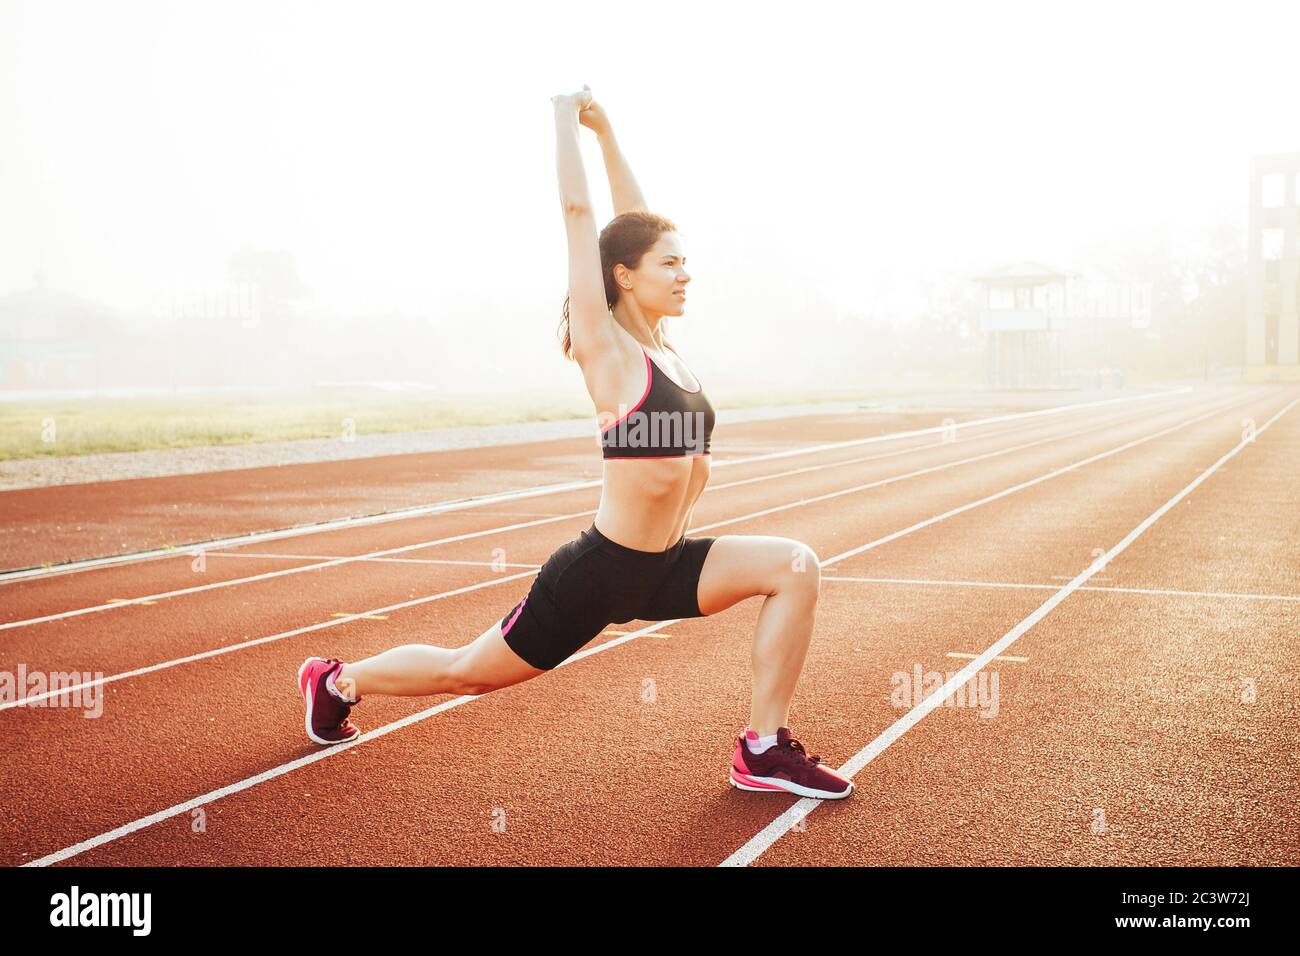 Athletic woman stretching on running track before training, healthy fitness lifesty Stock Photo